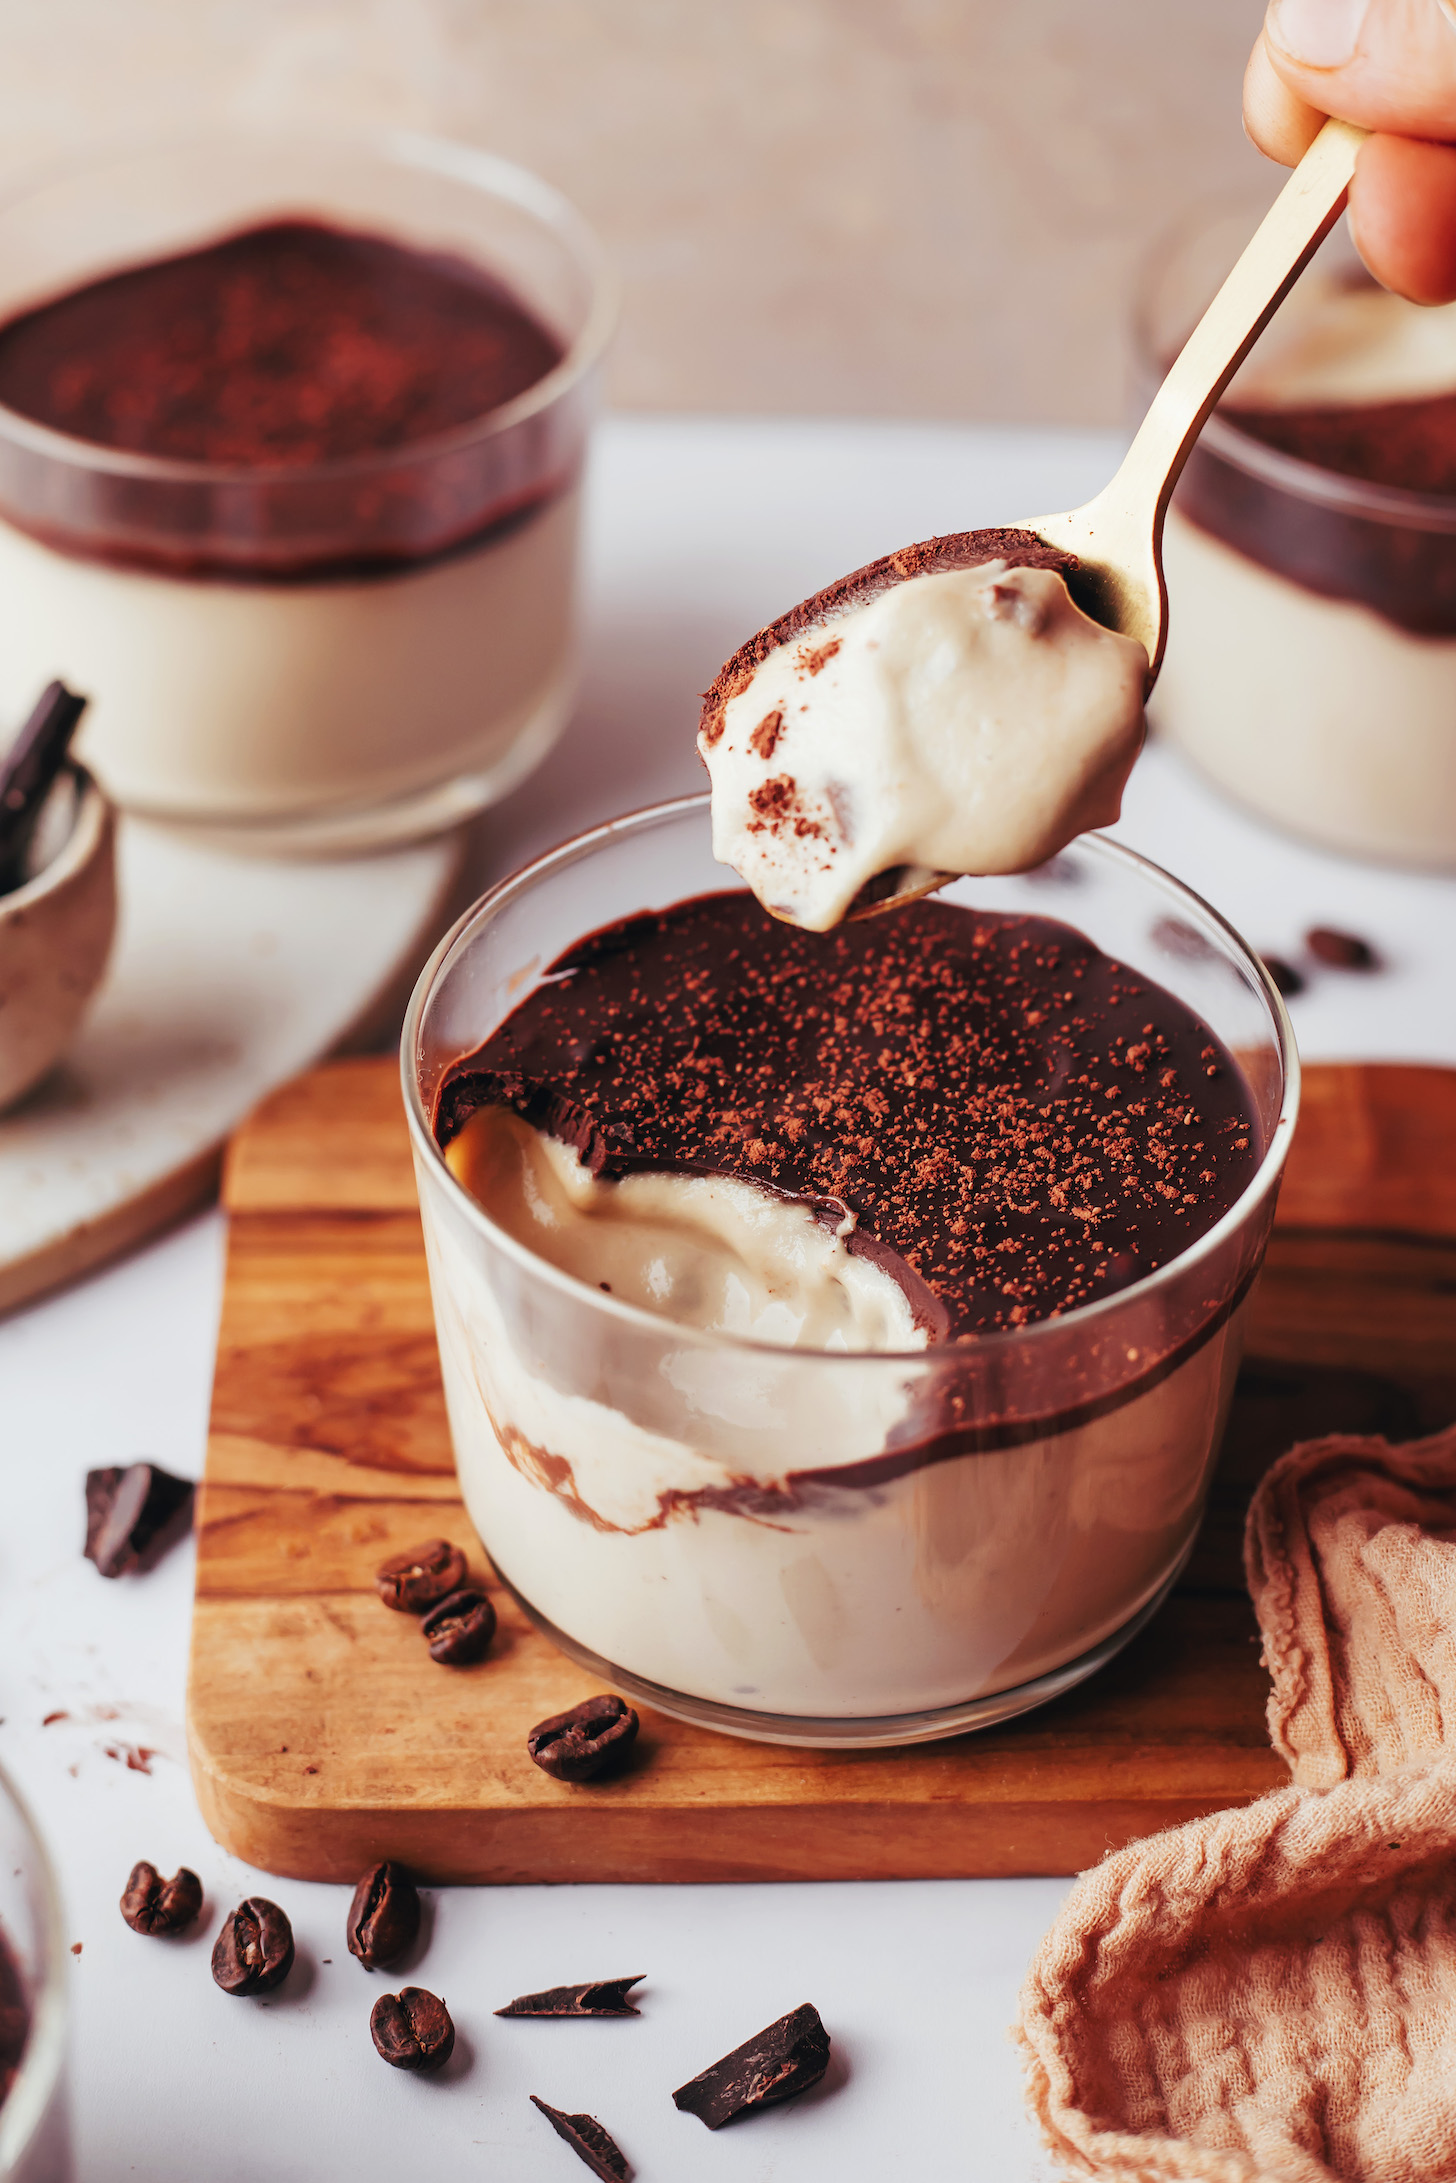 Holding a spoon of vegan tiramisu pudding over a dessert cup with more pudding